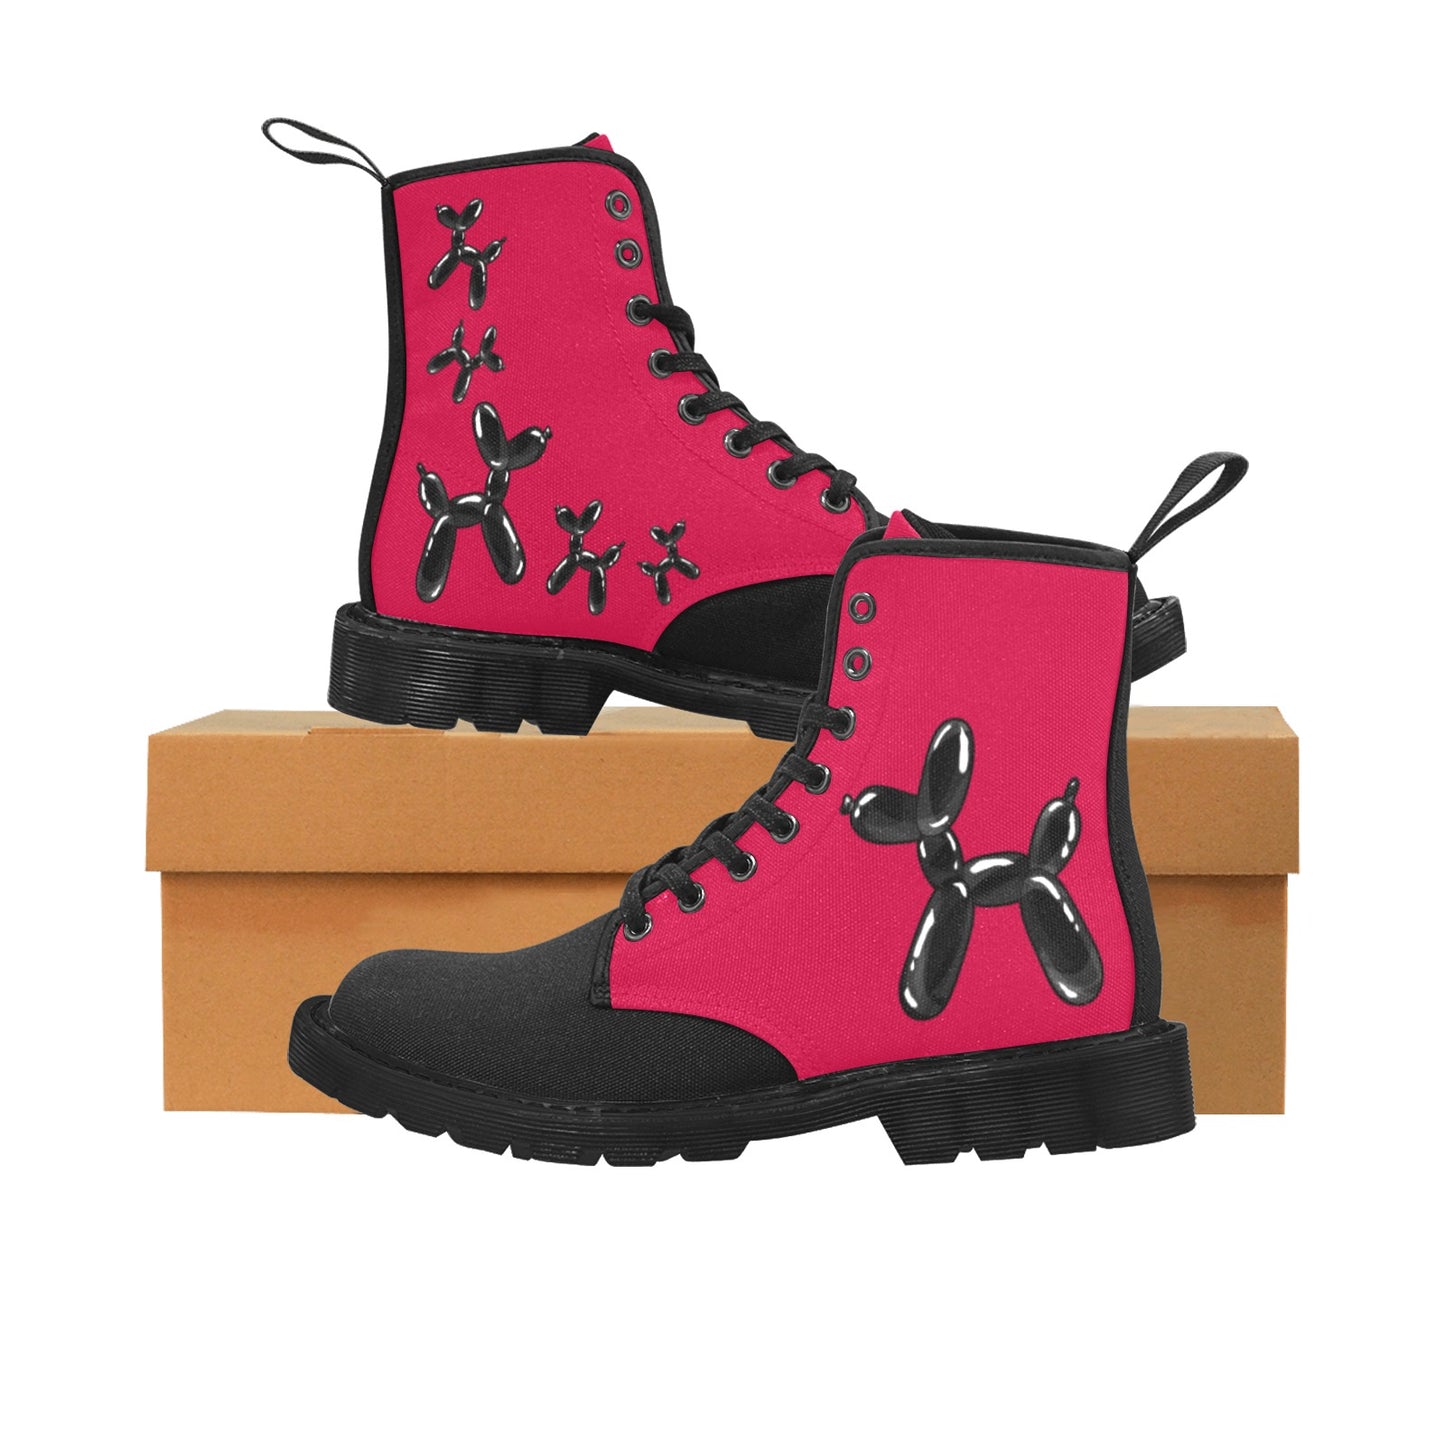 Balloon Twister Boots, red with black balloon dogs